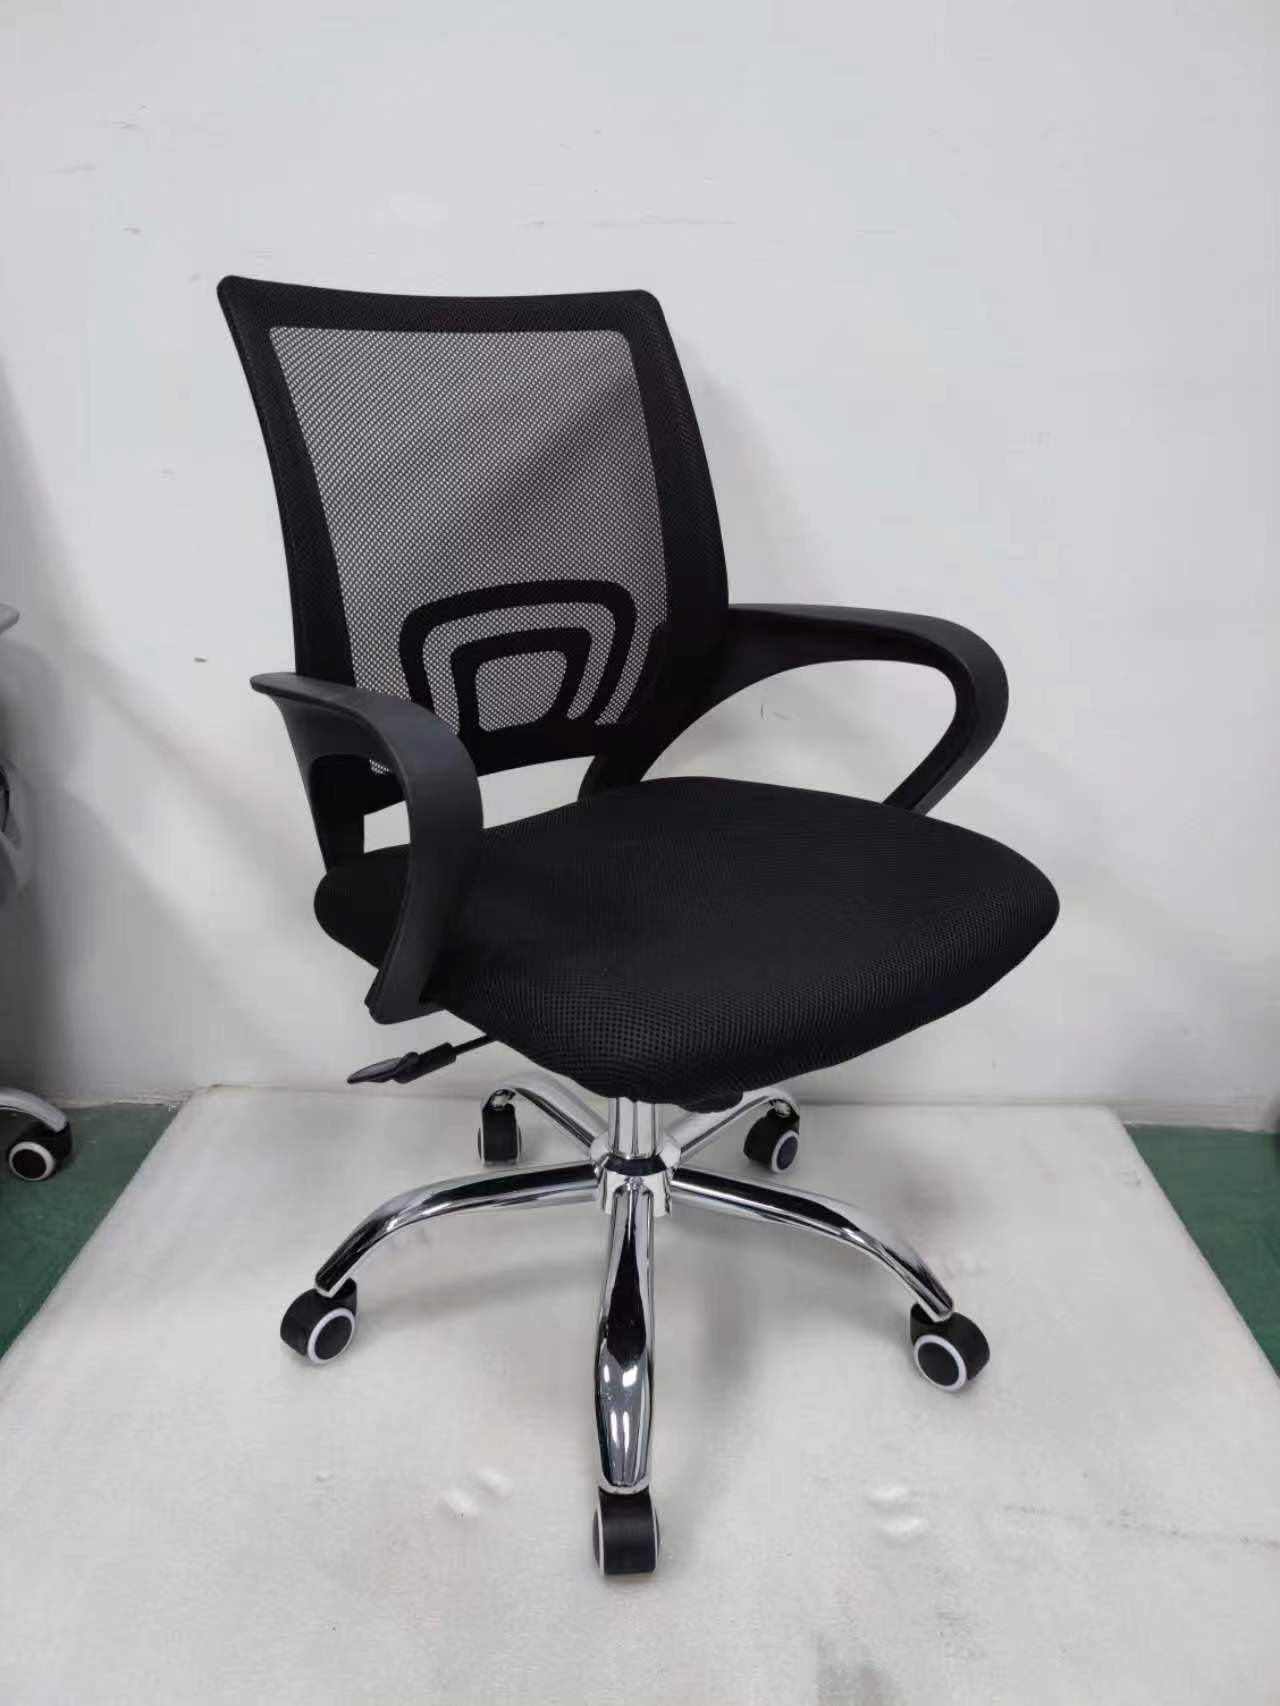 Office Chairs Closeout. 2000 units. EXW Los Angeles $19.00 unit.